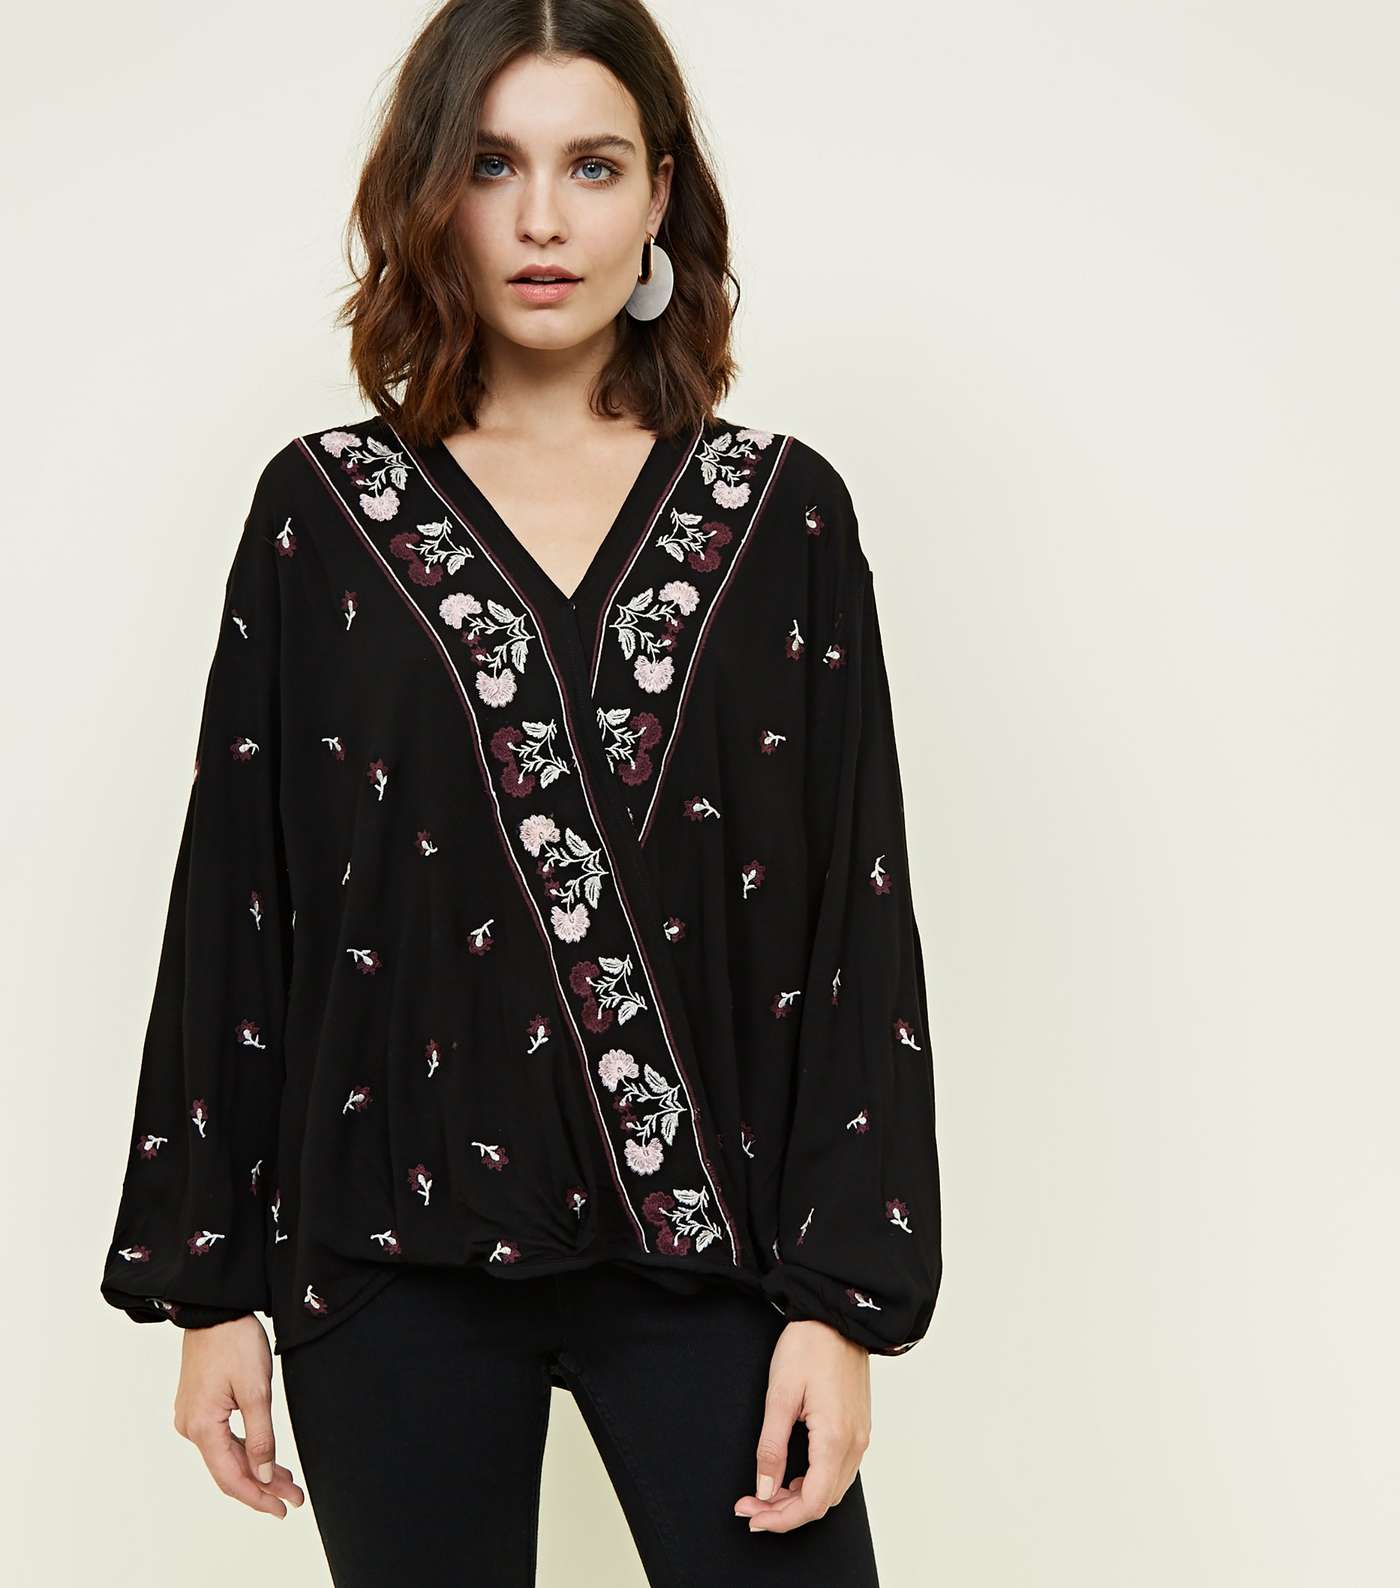 Apricot Black Floral Embroidered Wrap Top